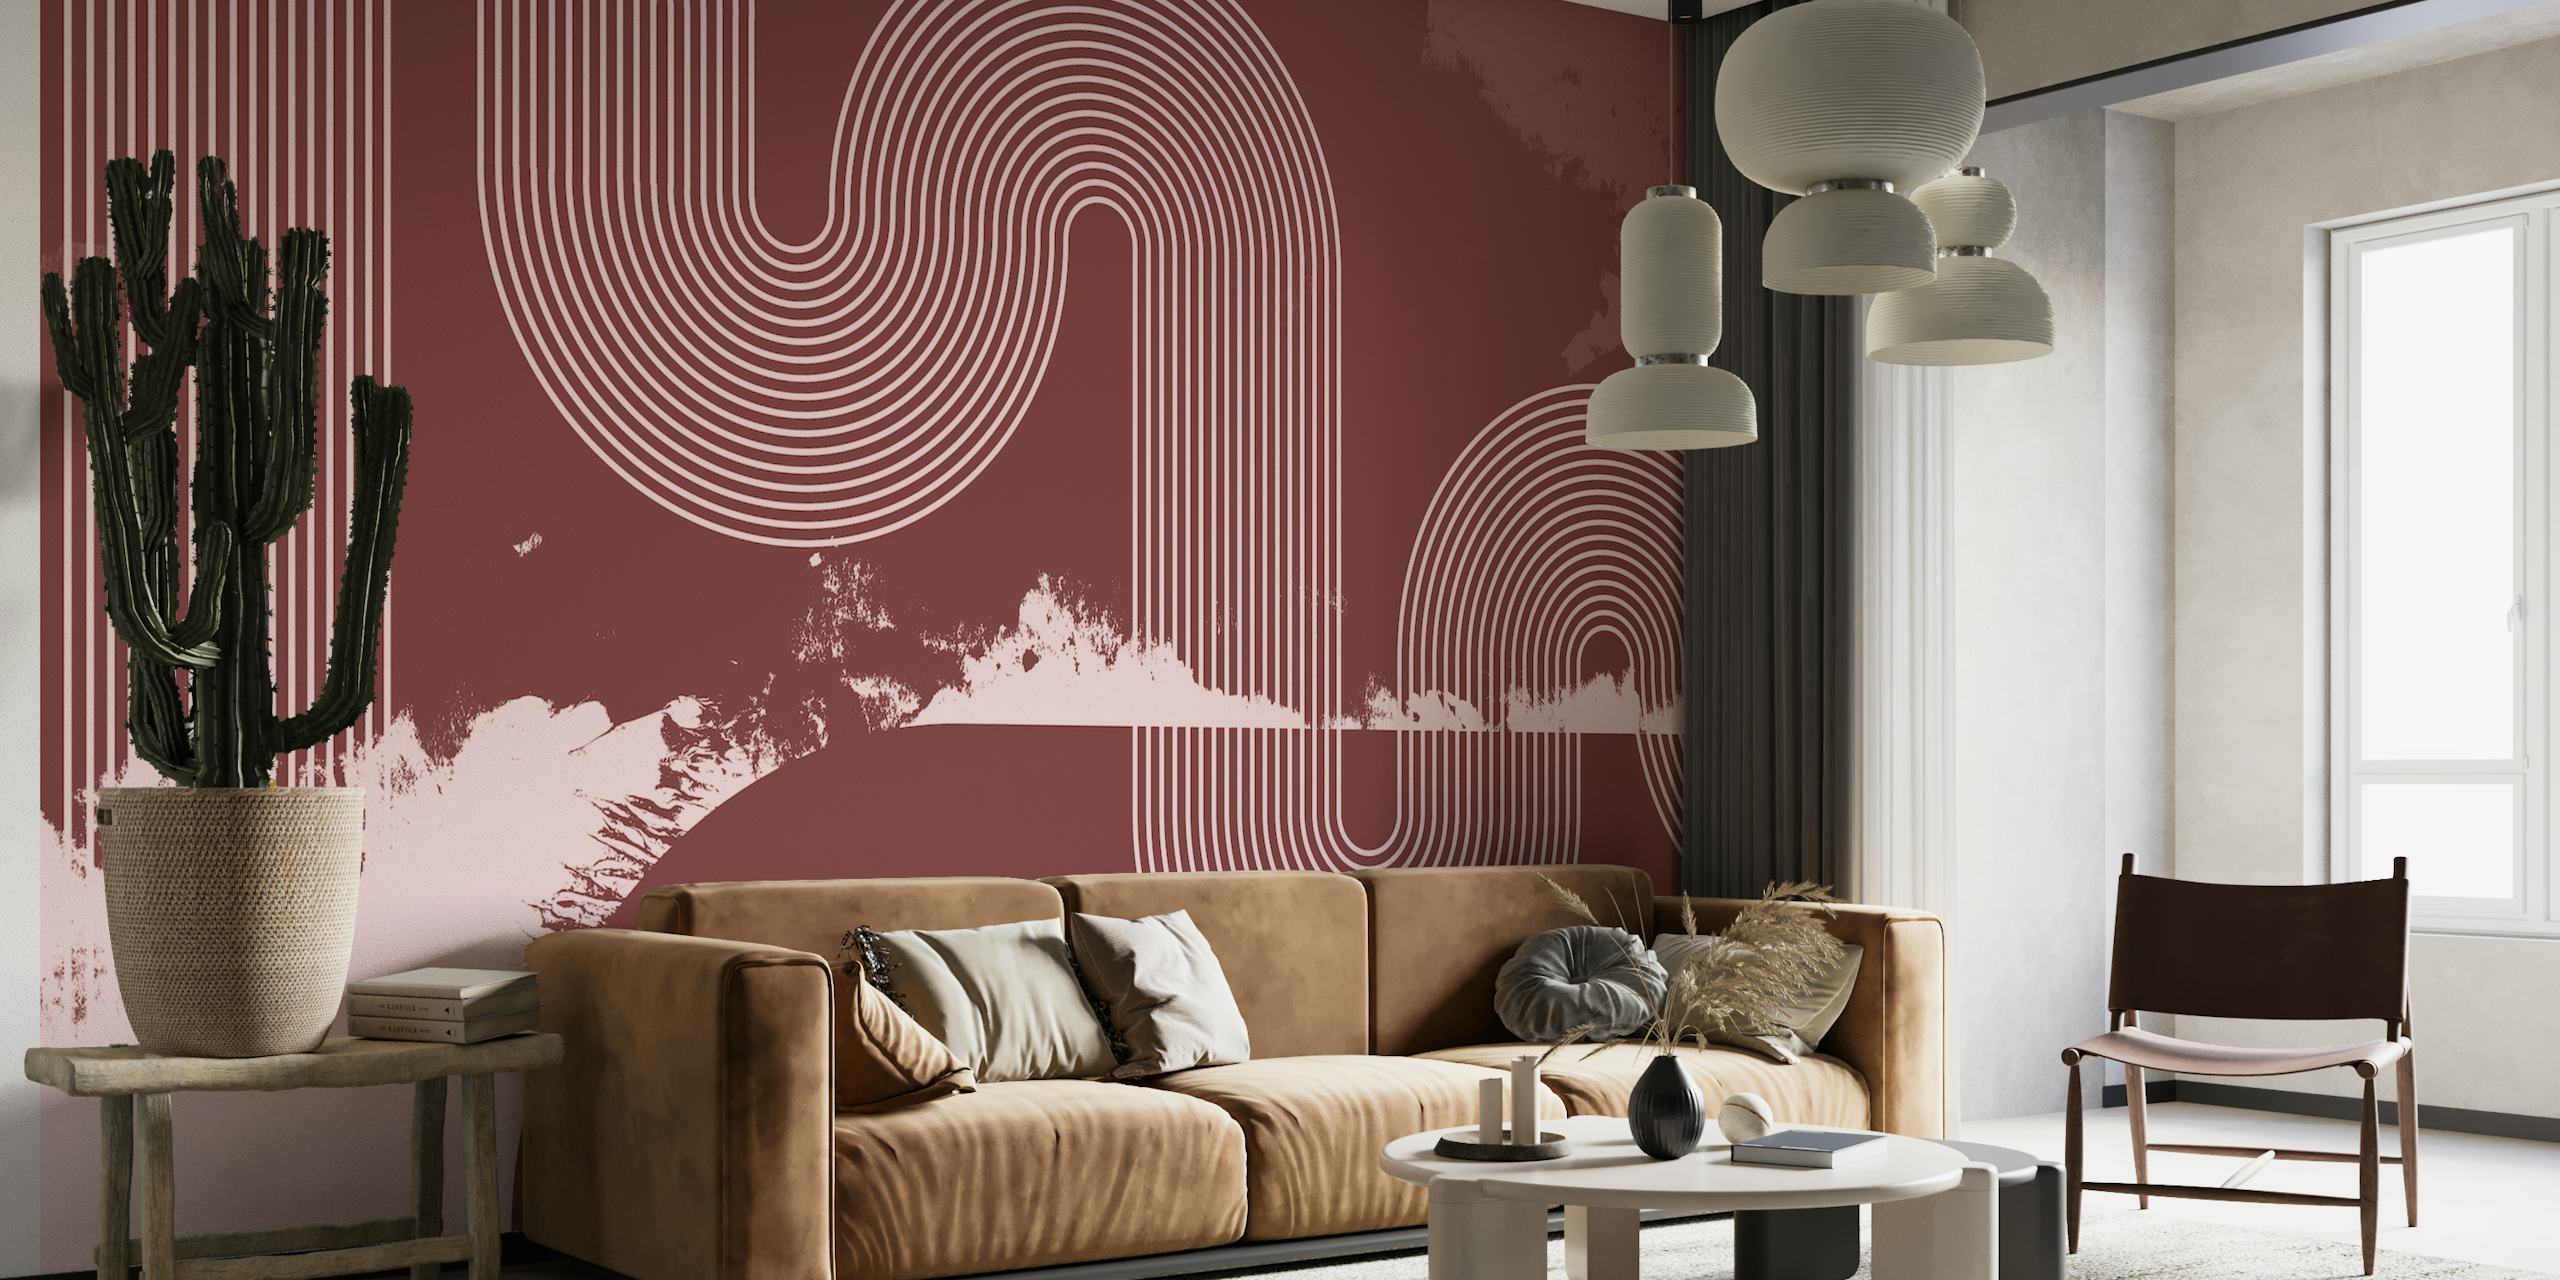 Mid Century Modern Curvy Line Art wall mural in maroon with abstract white lines.